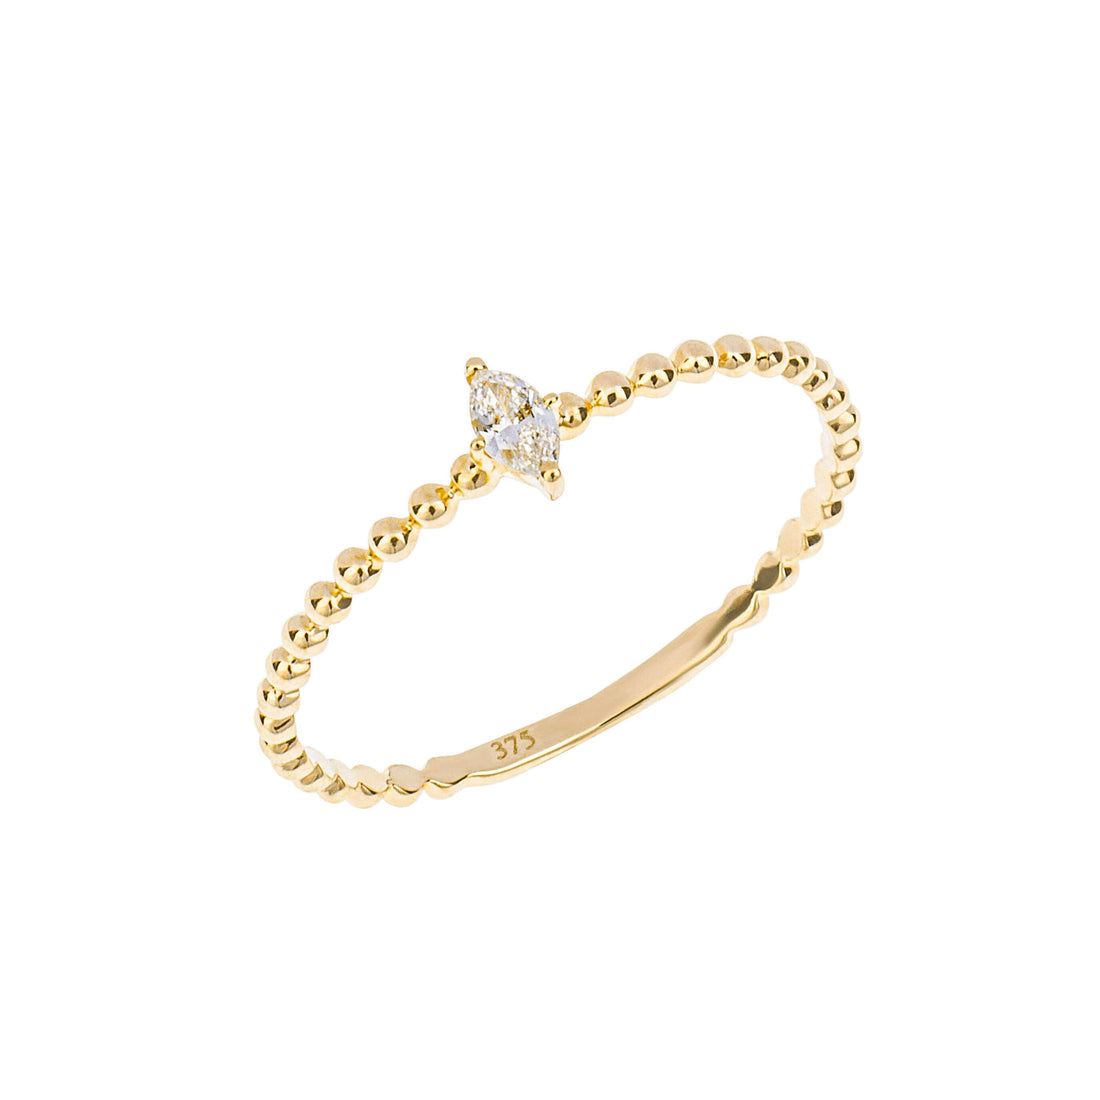 Dainty Beaded Ring with Marquise Diamond in 9ct Yellow Gold - Robert Anthony Jewellers, Edinburgh